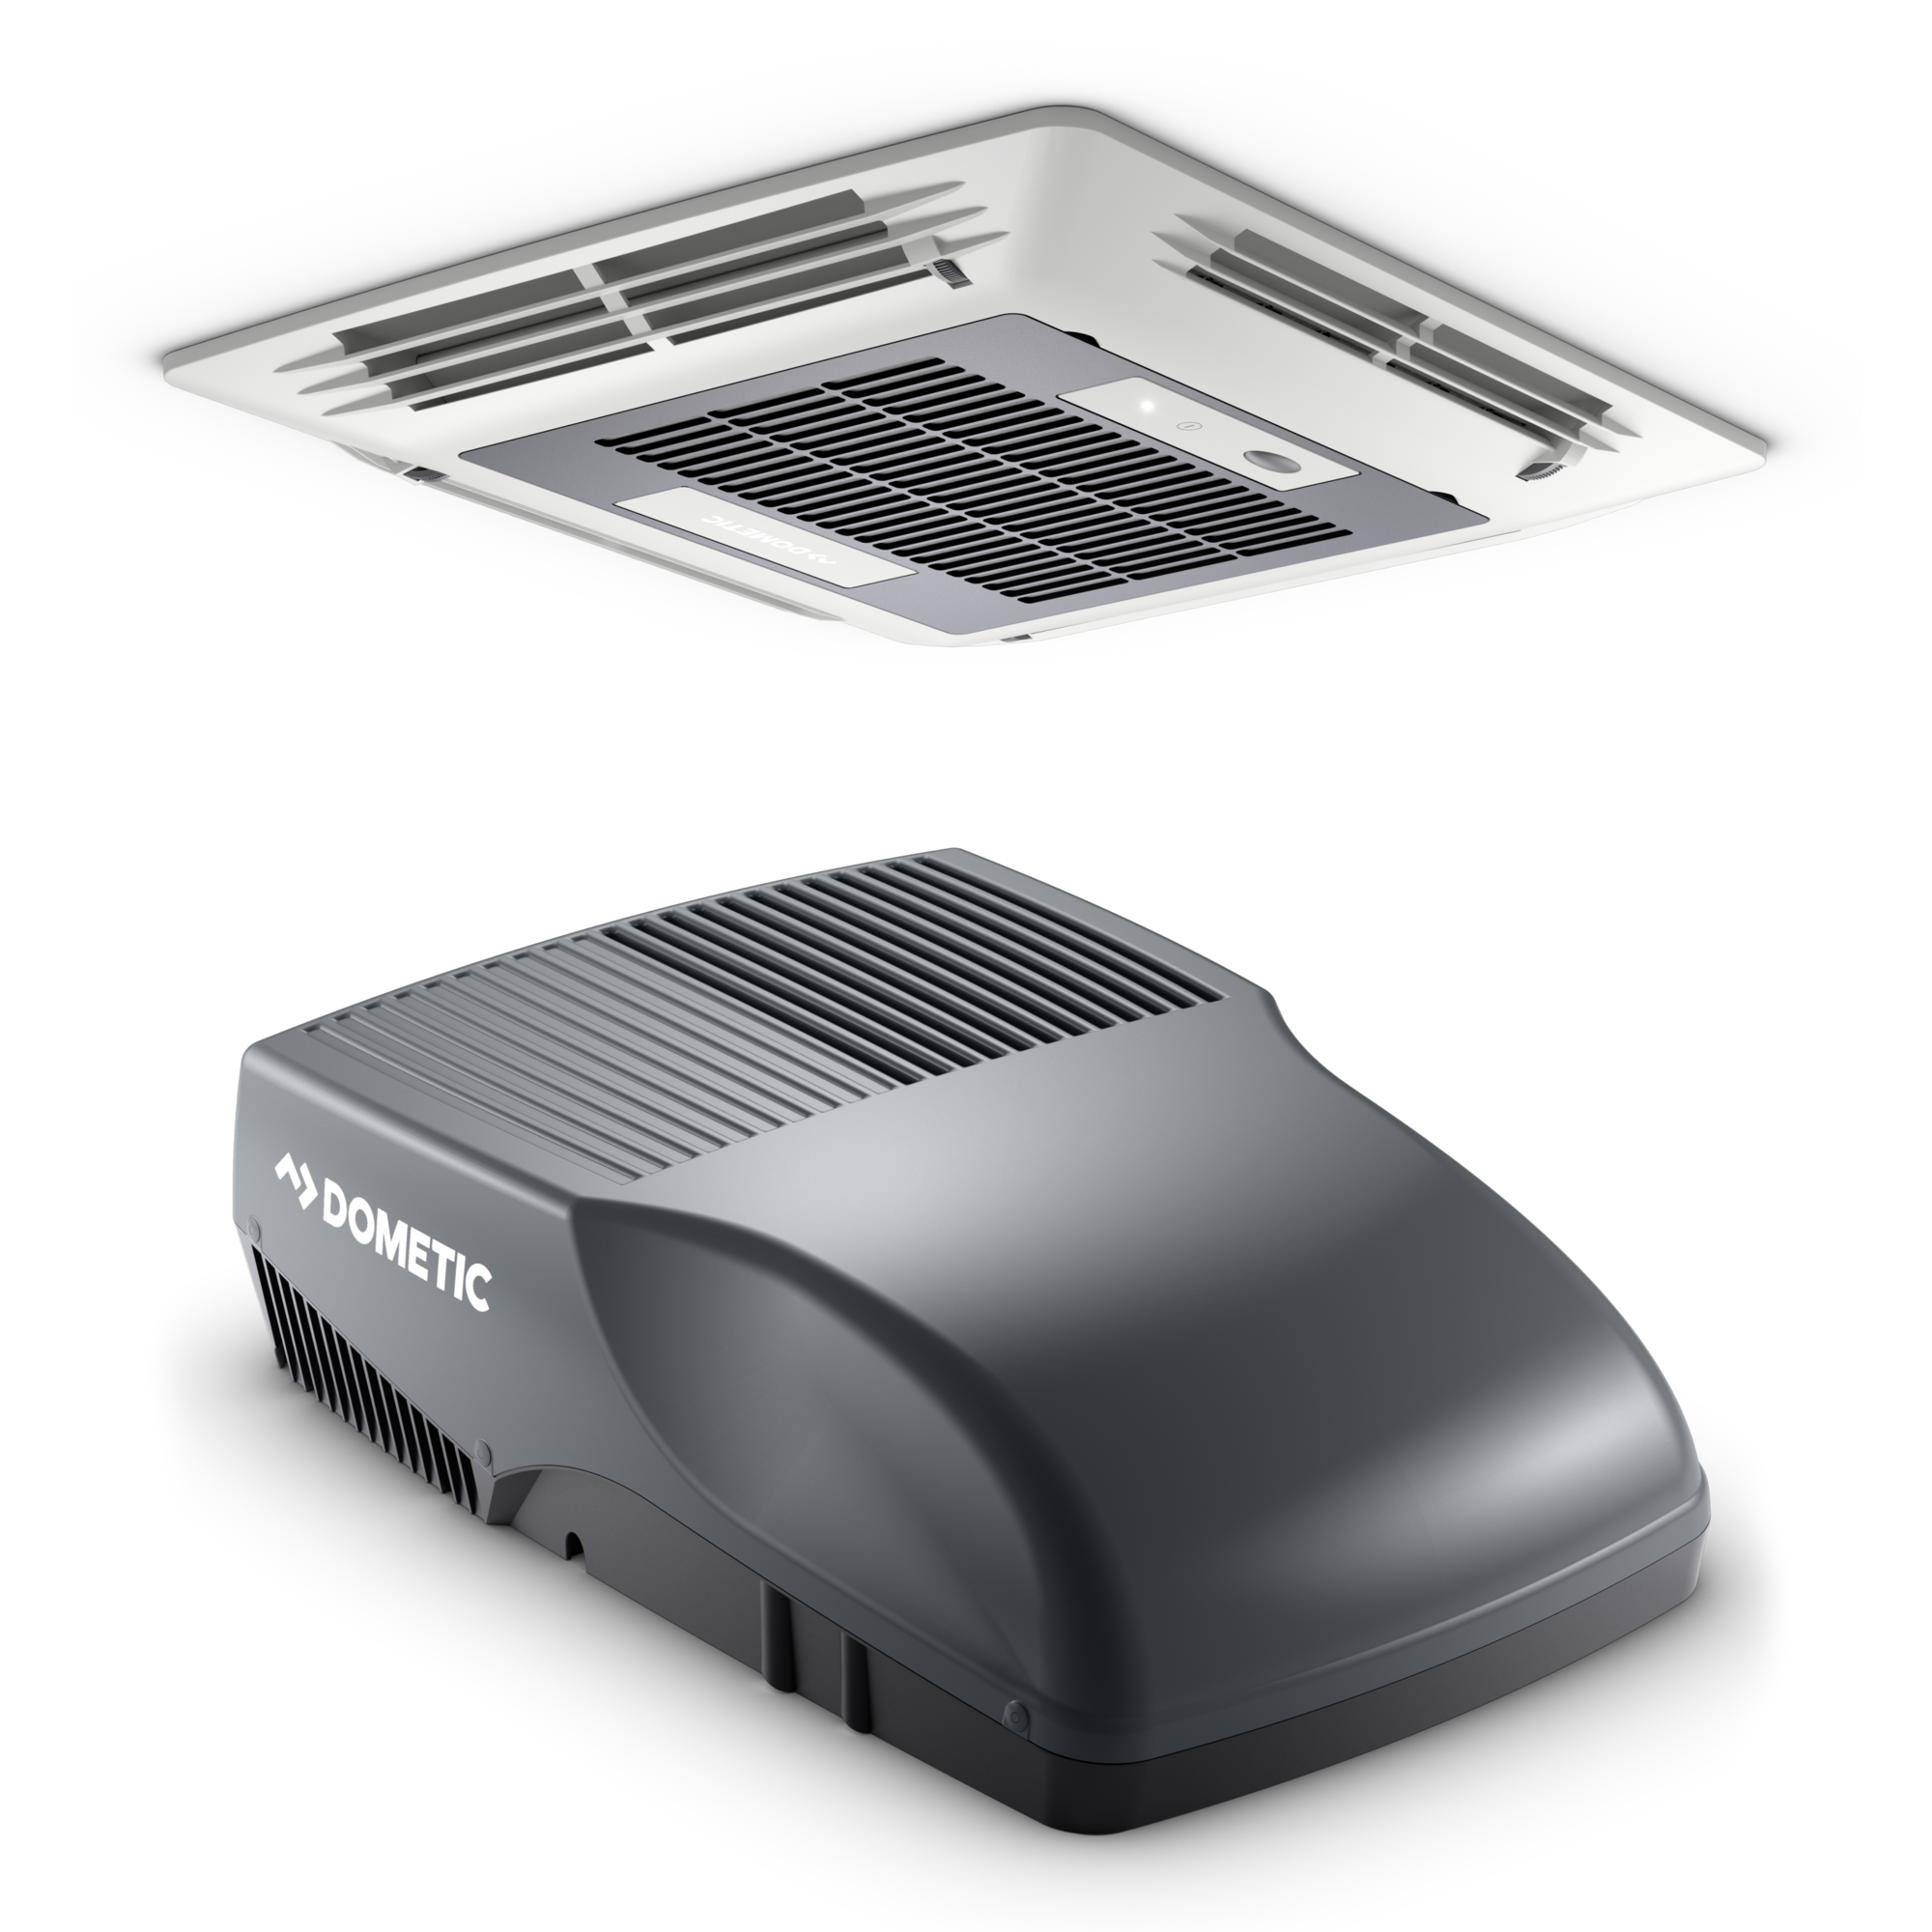 Dometic FreshJet 2000 air conditioning for vehicles up to 6.5 meters, dark grey